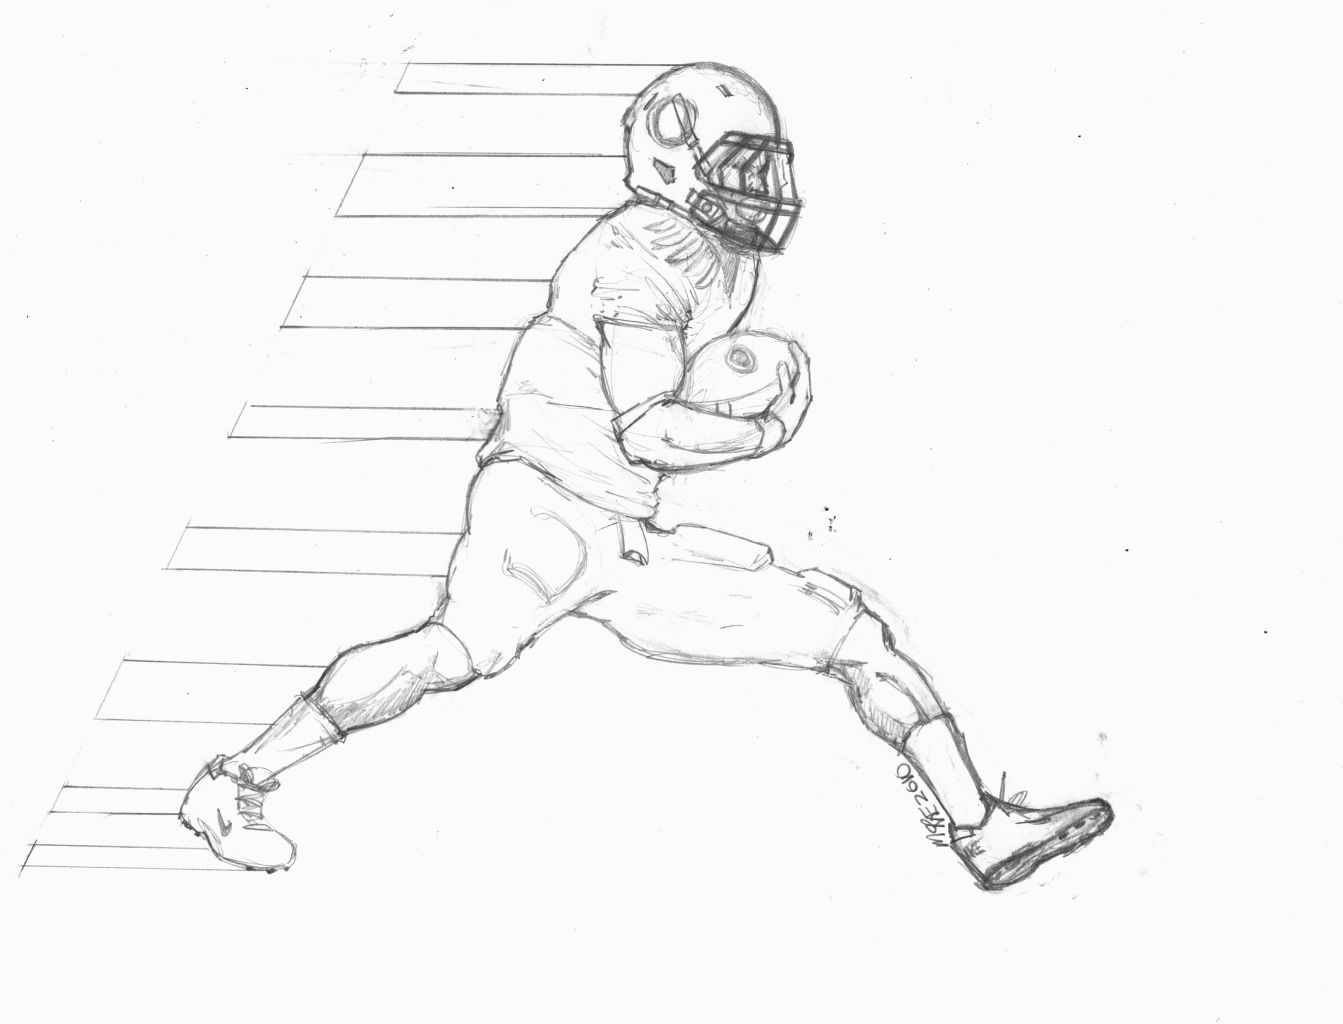 10 Pics of Cam Newton Cleats Coloring Pages - Cam Newton Coloring ...